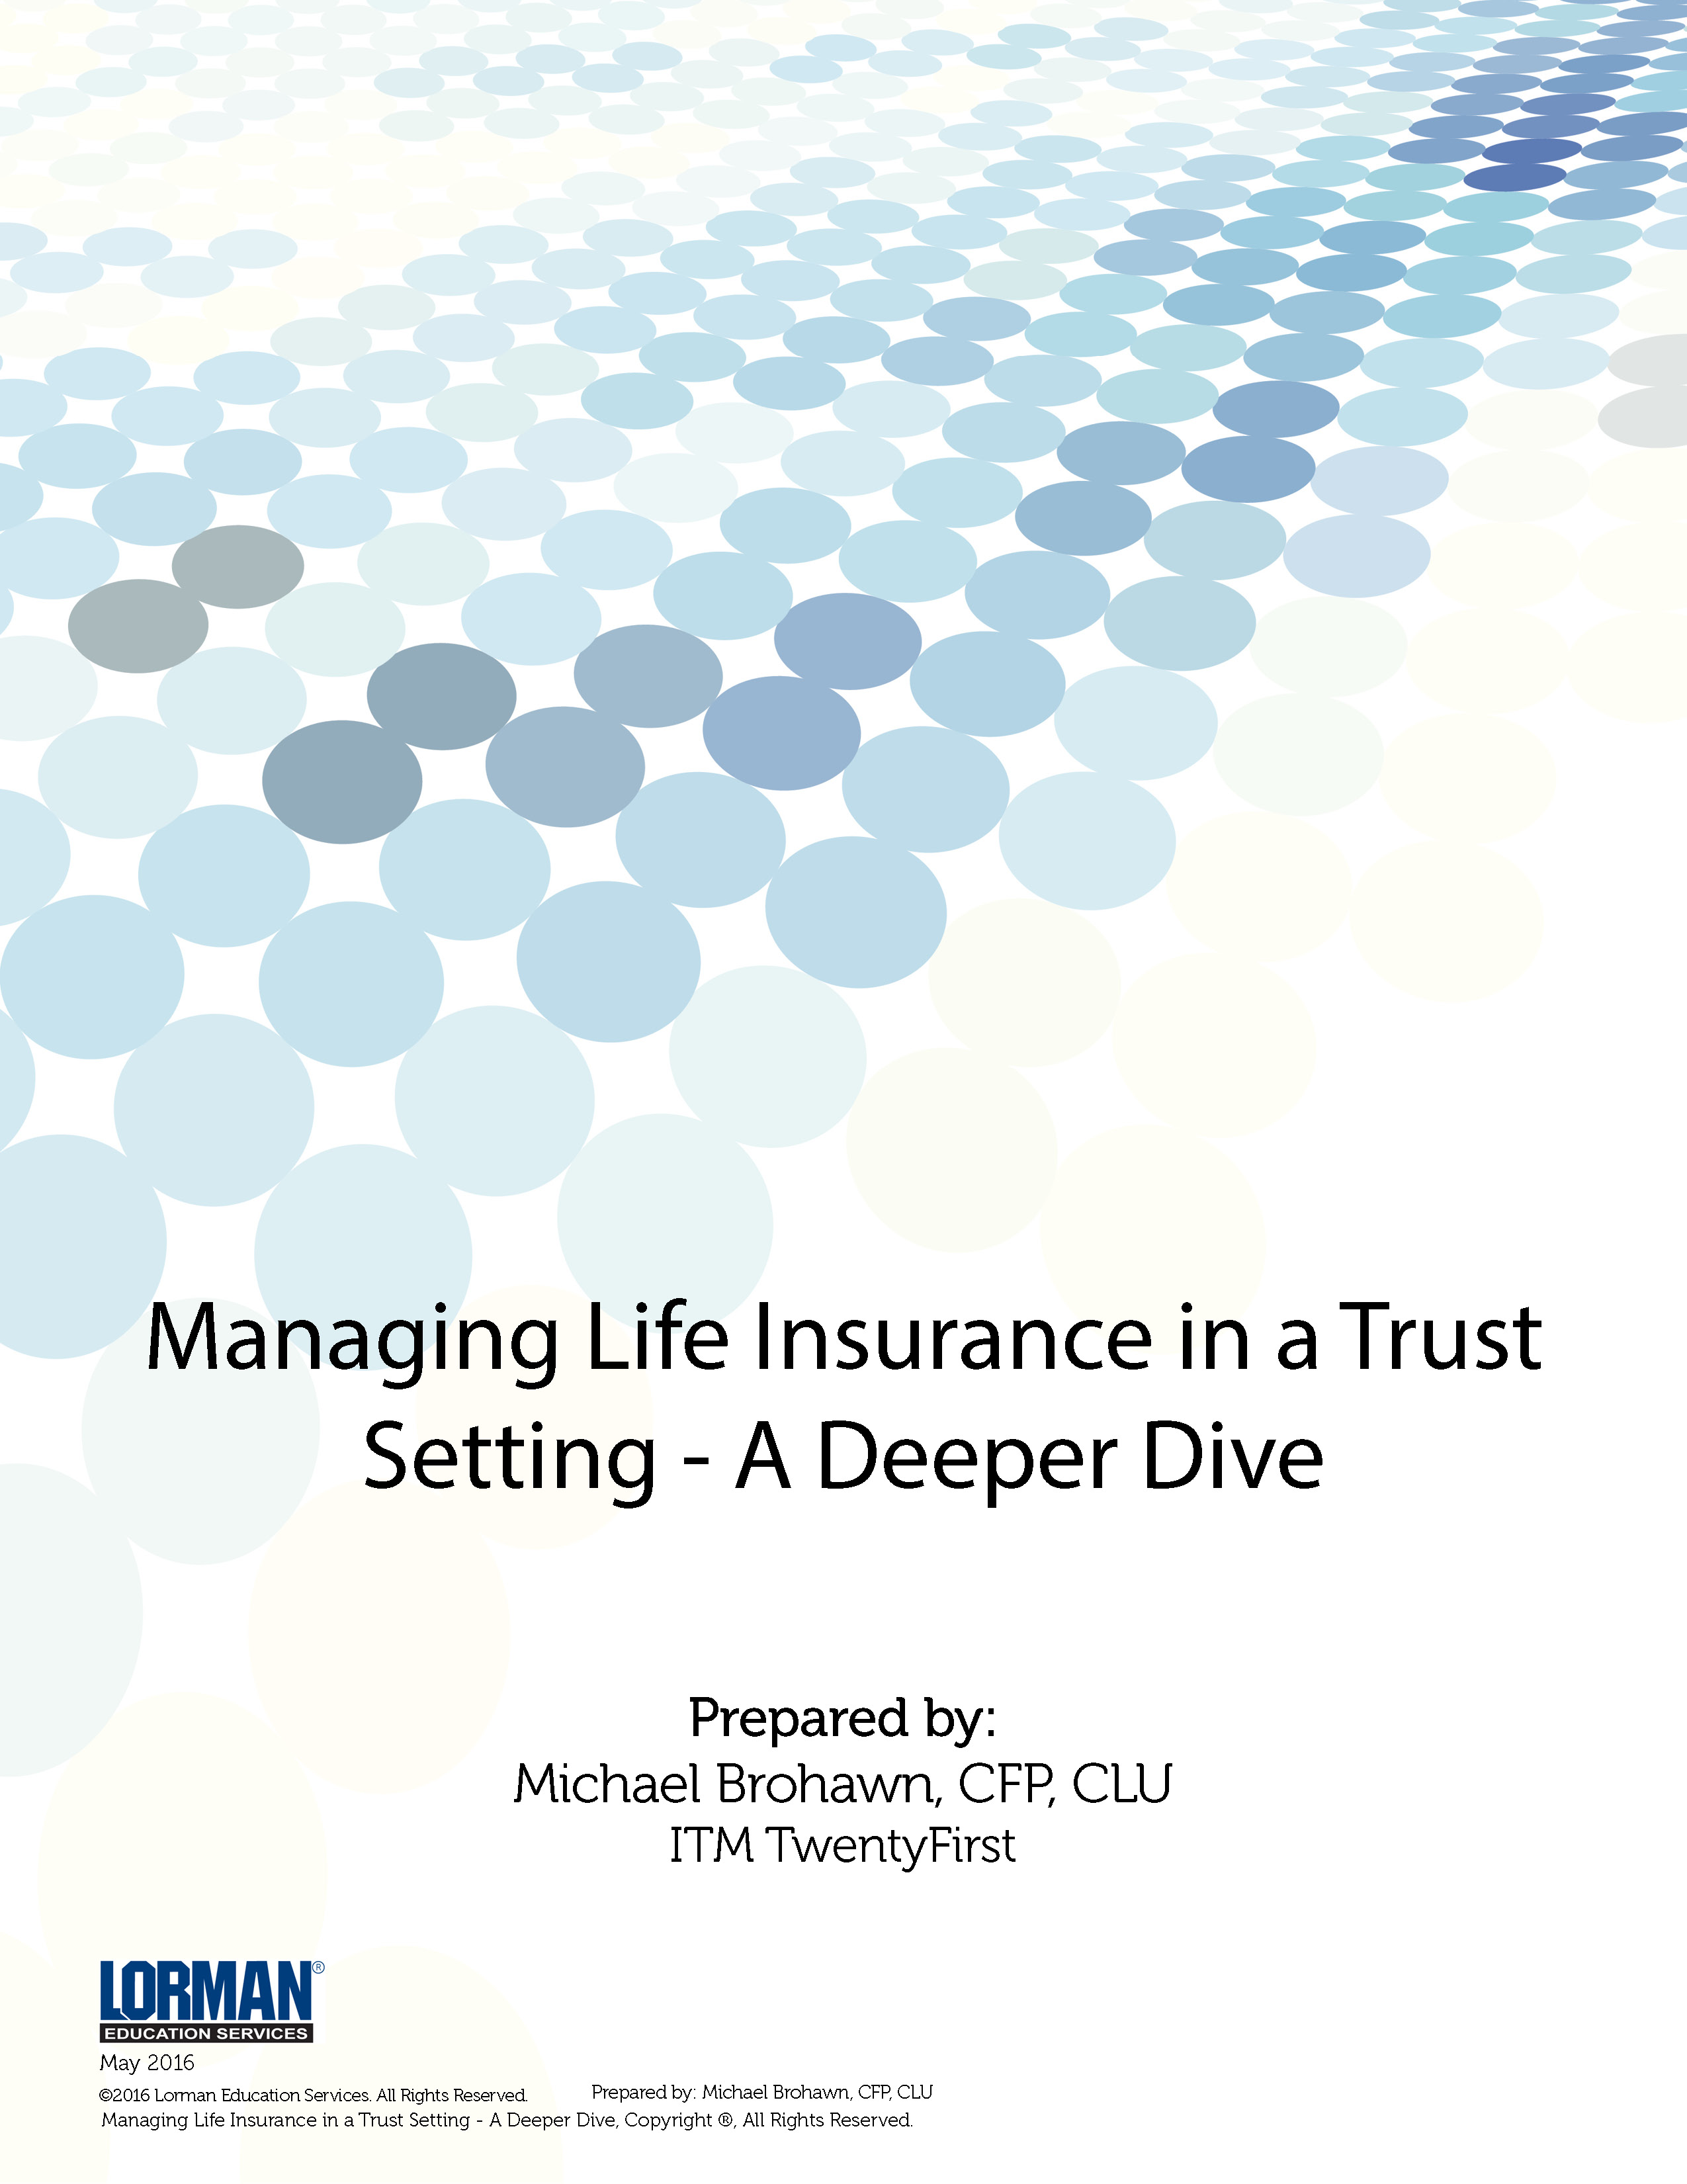 Managing Life Insurance in a Trust Setting - A Deeper Dive